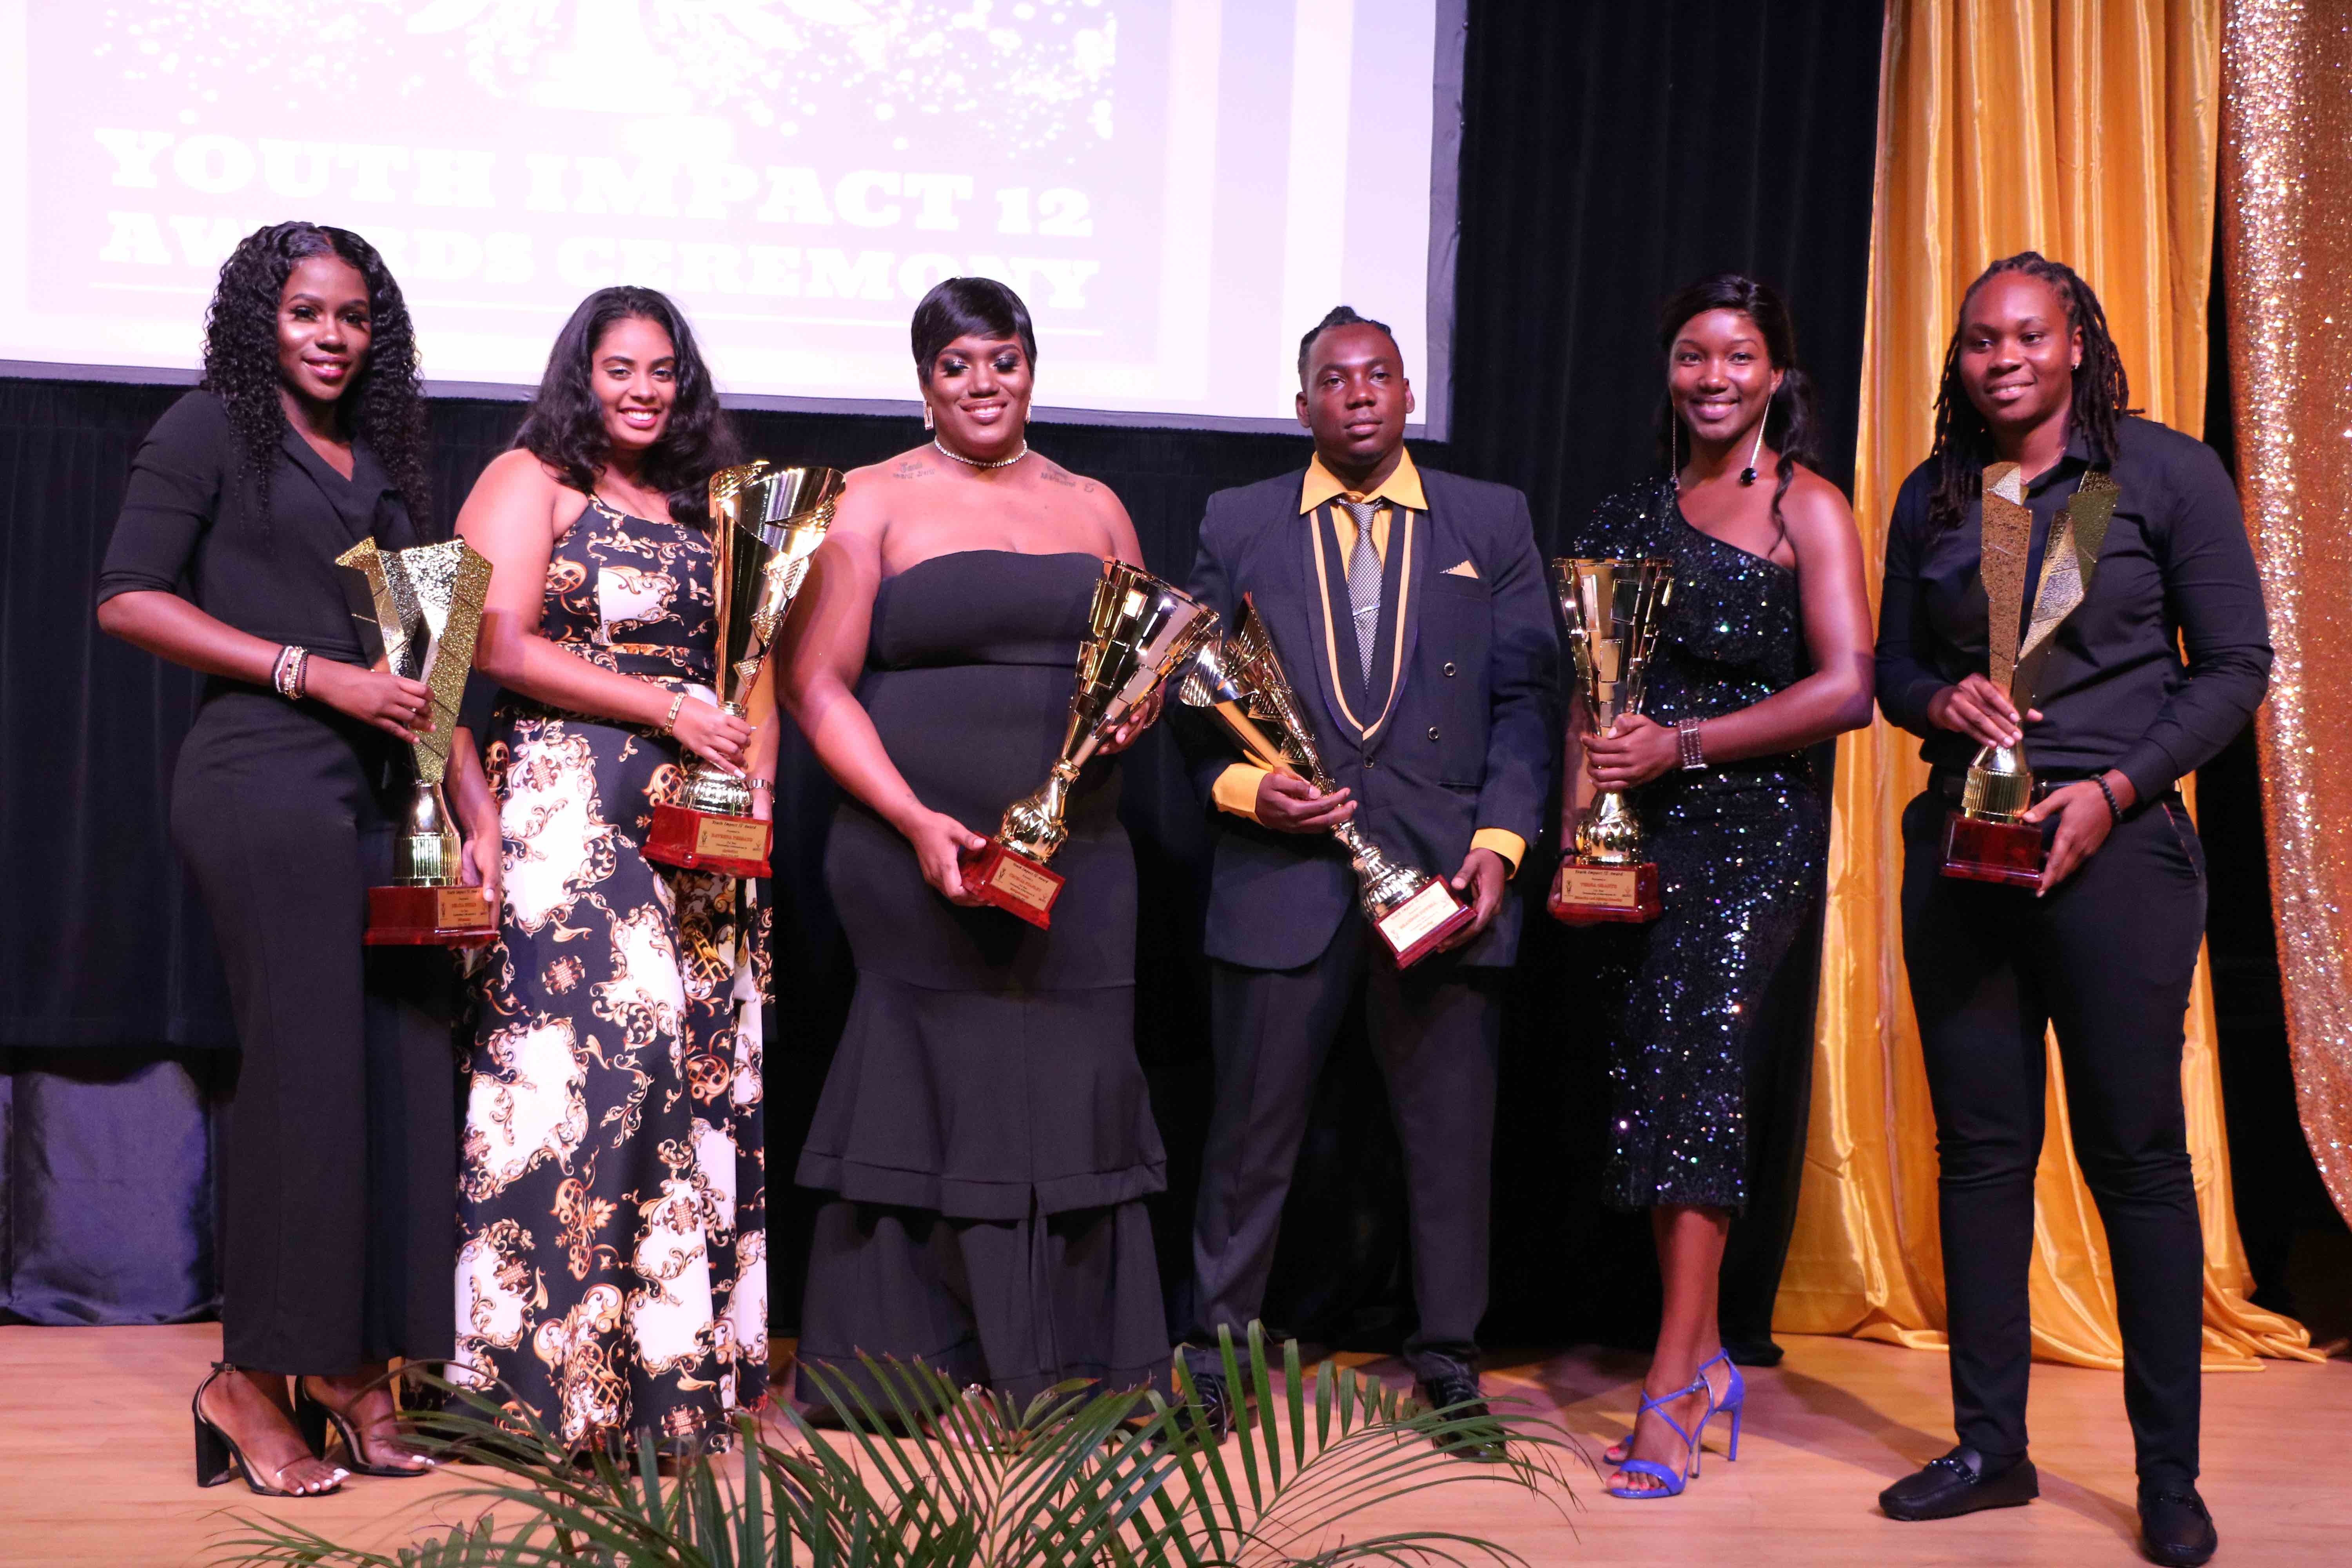 Six awardees at the Youth Impact 12 Awards Ceremony hosted by the Department of Youth on August 12, 2020, at the Nevis Performing Arts Centre (l-r) Delcia Burke awarded for Volunteerism; Raveena Persaud awarded for Extraordinary Youth in Agriculture; Cecelia Stanley awarded for Youth in Entrepreneurship; Brandon Powell awarded for Youth in Technology; Verna Grant awarded for Education and Life-long Learning; and Melicia Clarke awarded for Sports Excellence